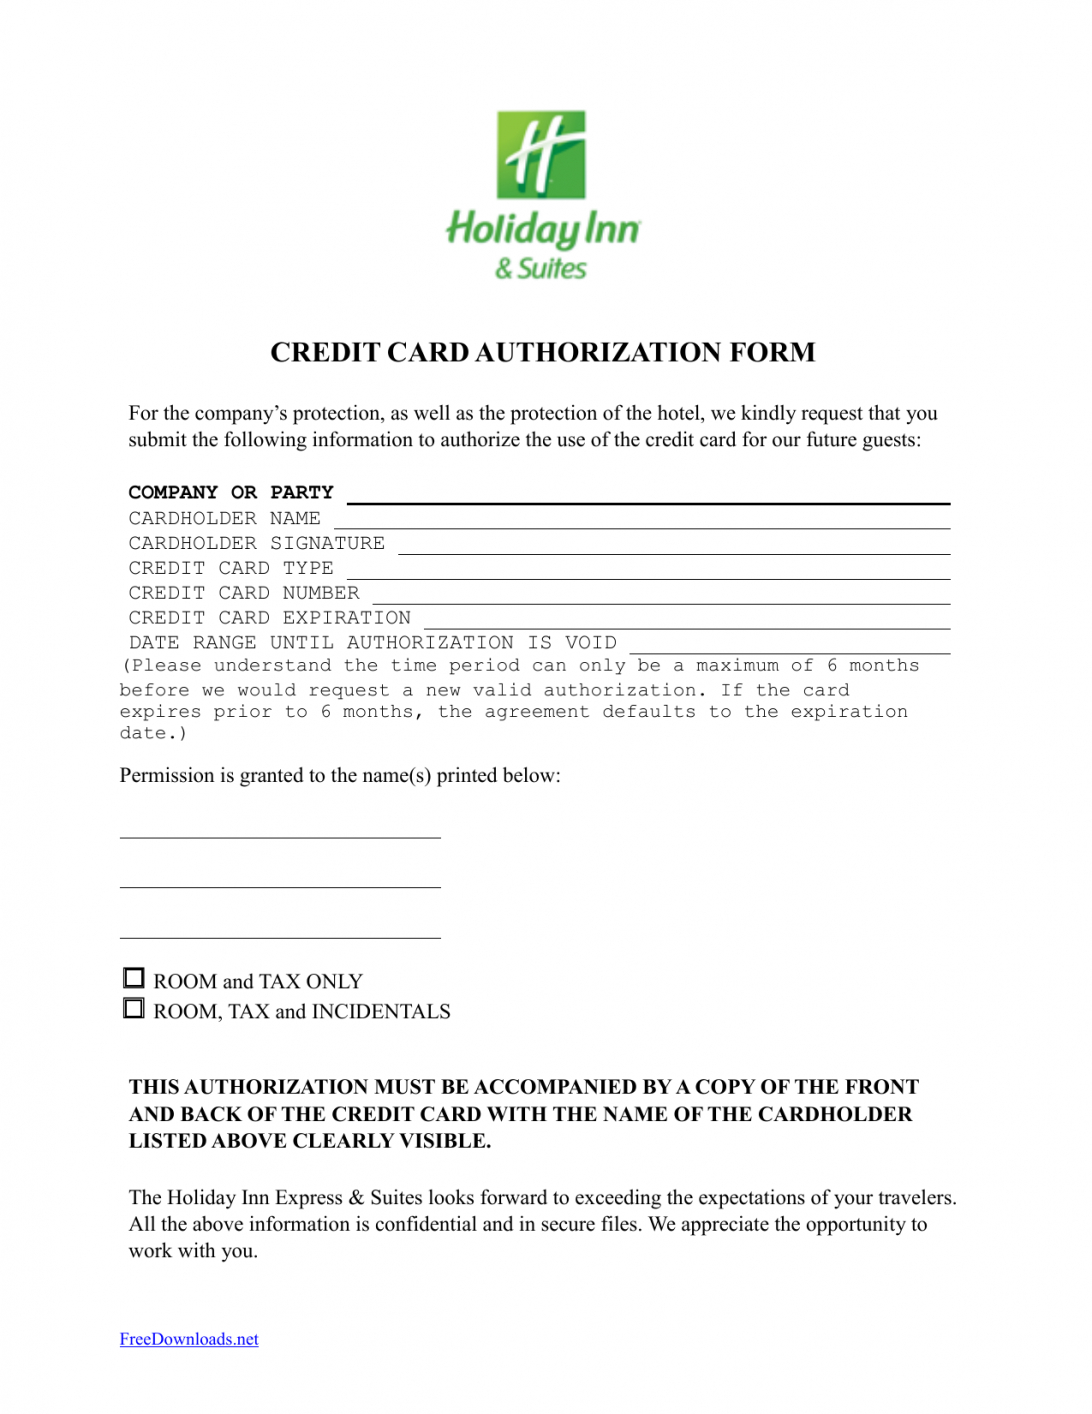 Credit Card Authorization Form Template Downloadable Word For Hotel Credit Card Authorization Form Template